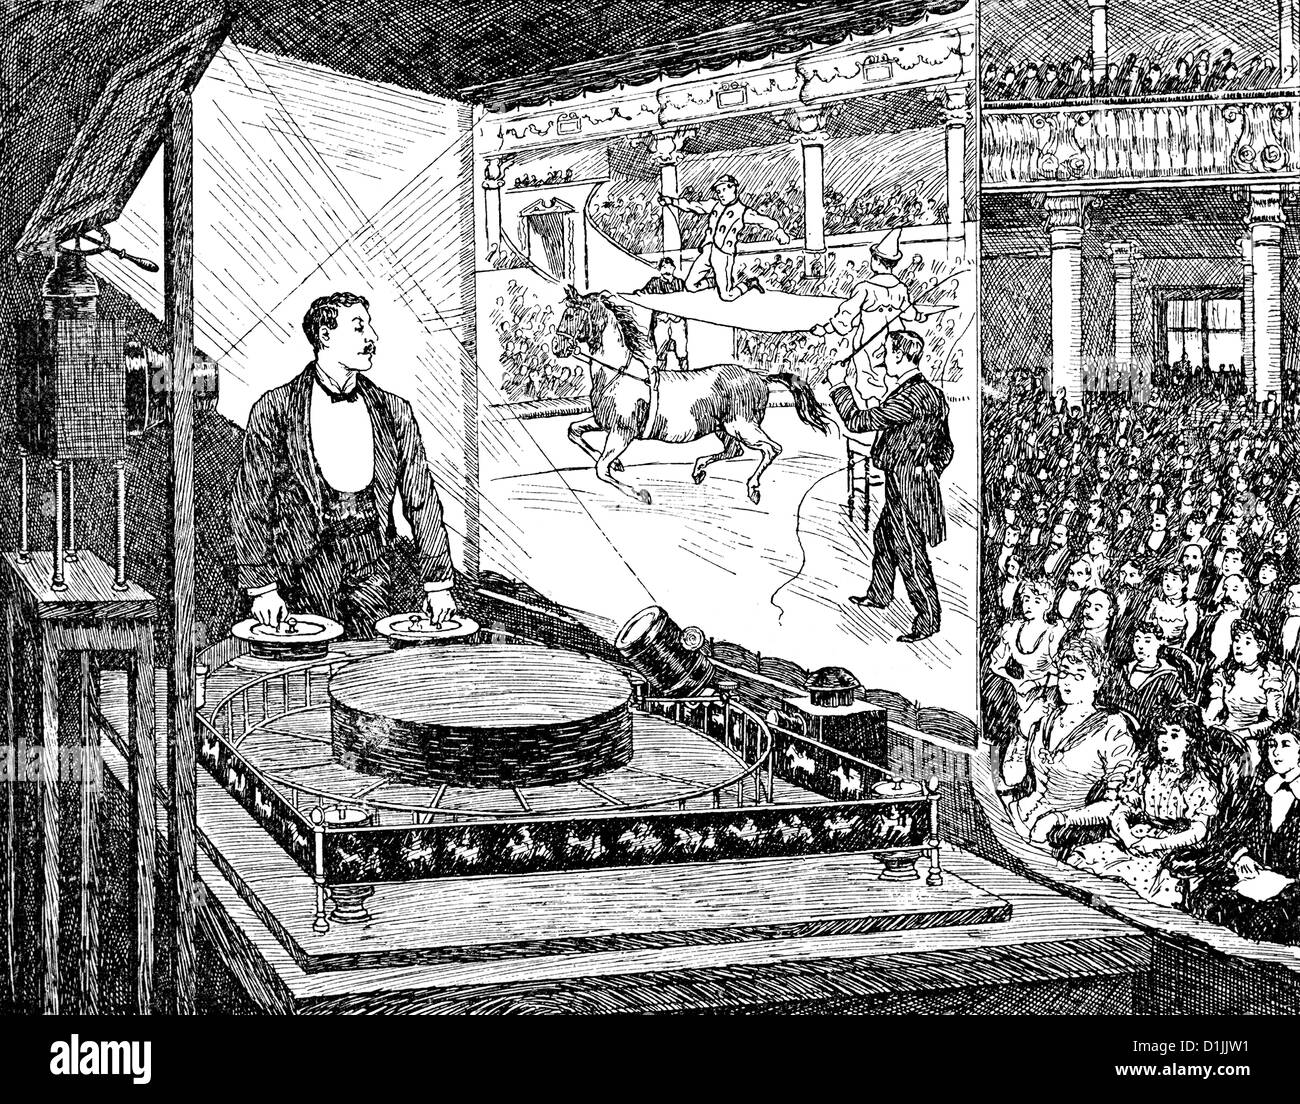 Cinema performance in a Praxinoscope or théâtre optique, Charles-Émile Reynaud, 1844 - 1918, French photographer, graphic artist Stock Photo